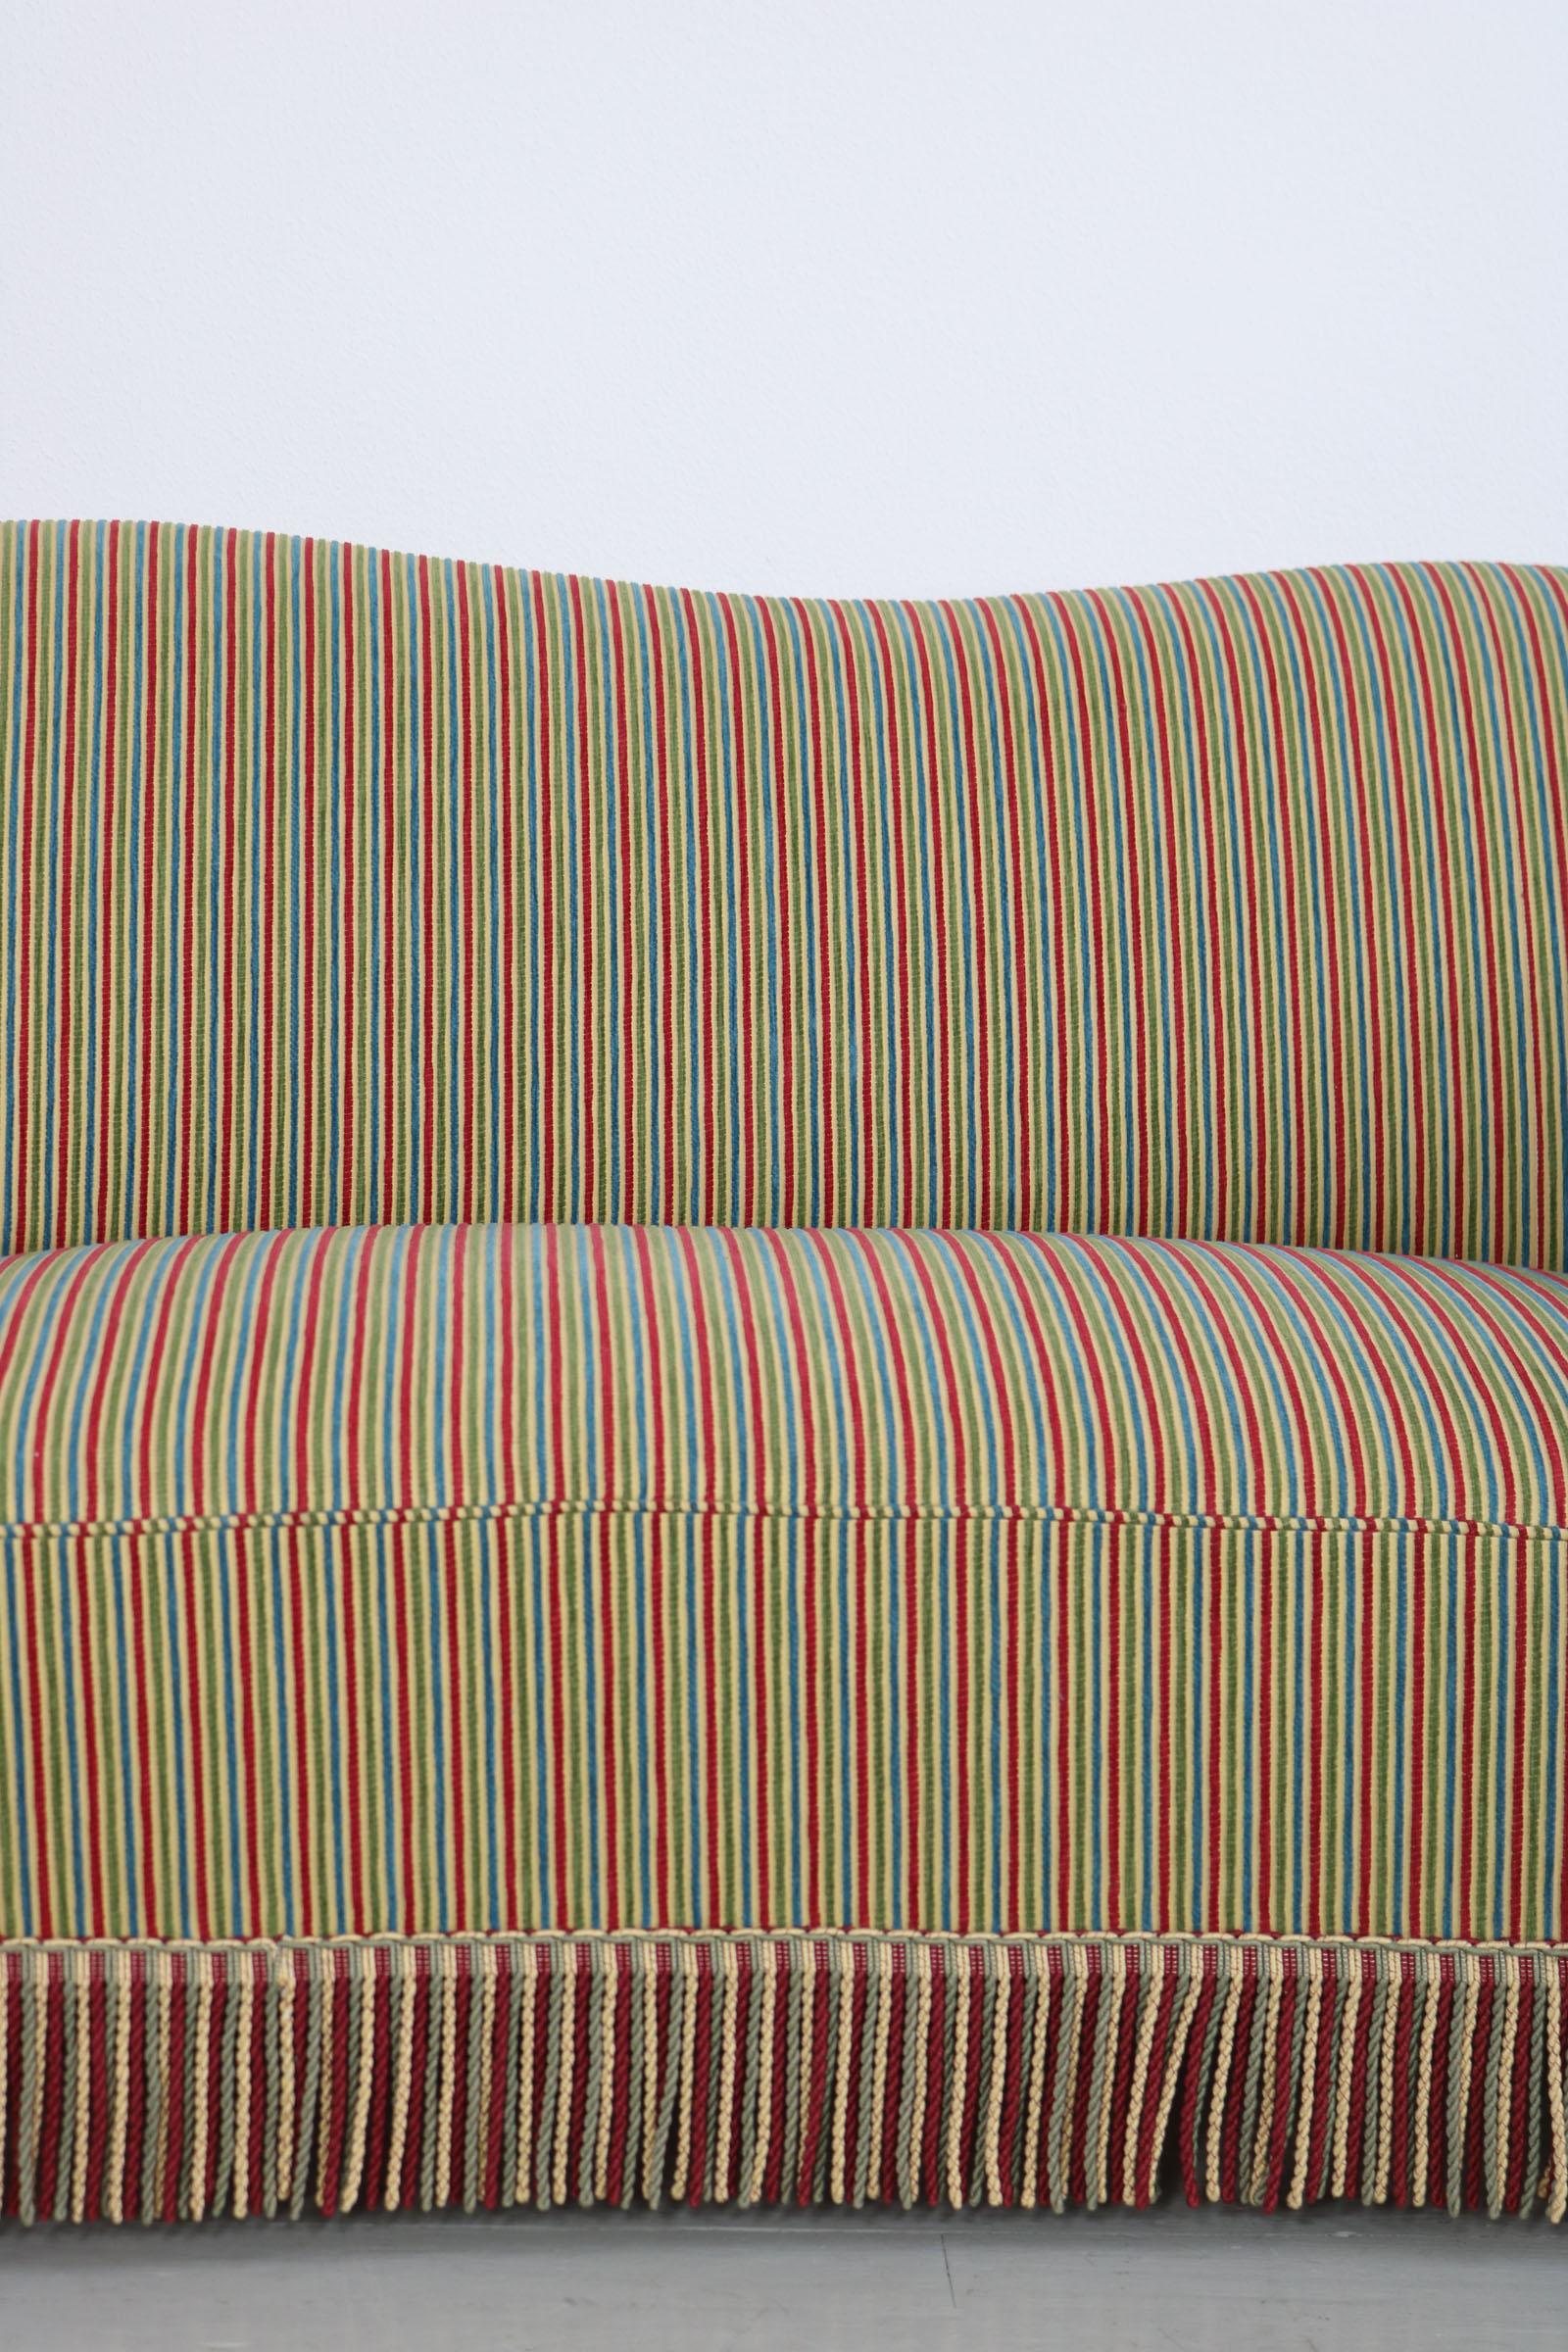 Set of 2 Sofas with Fabric by Fede Cheti, Italy 1940s For Sale 6